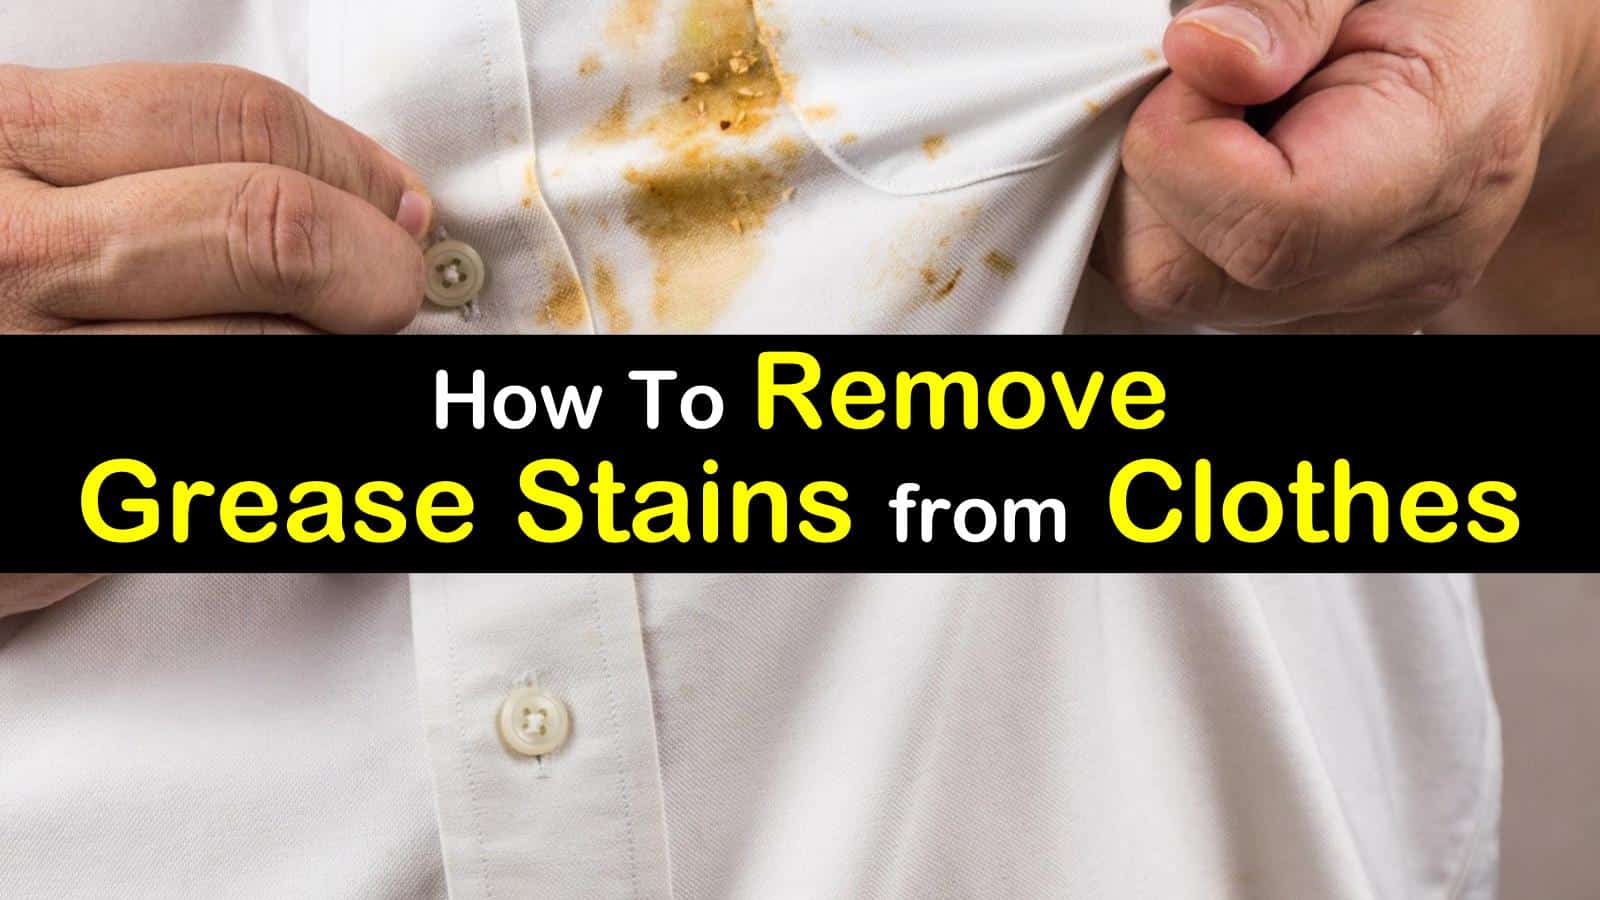 how to remove grease stains from clothes titleimg1